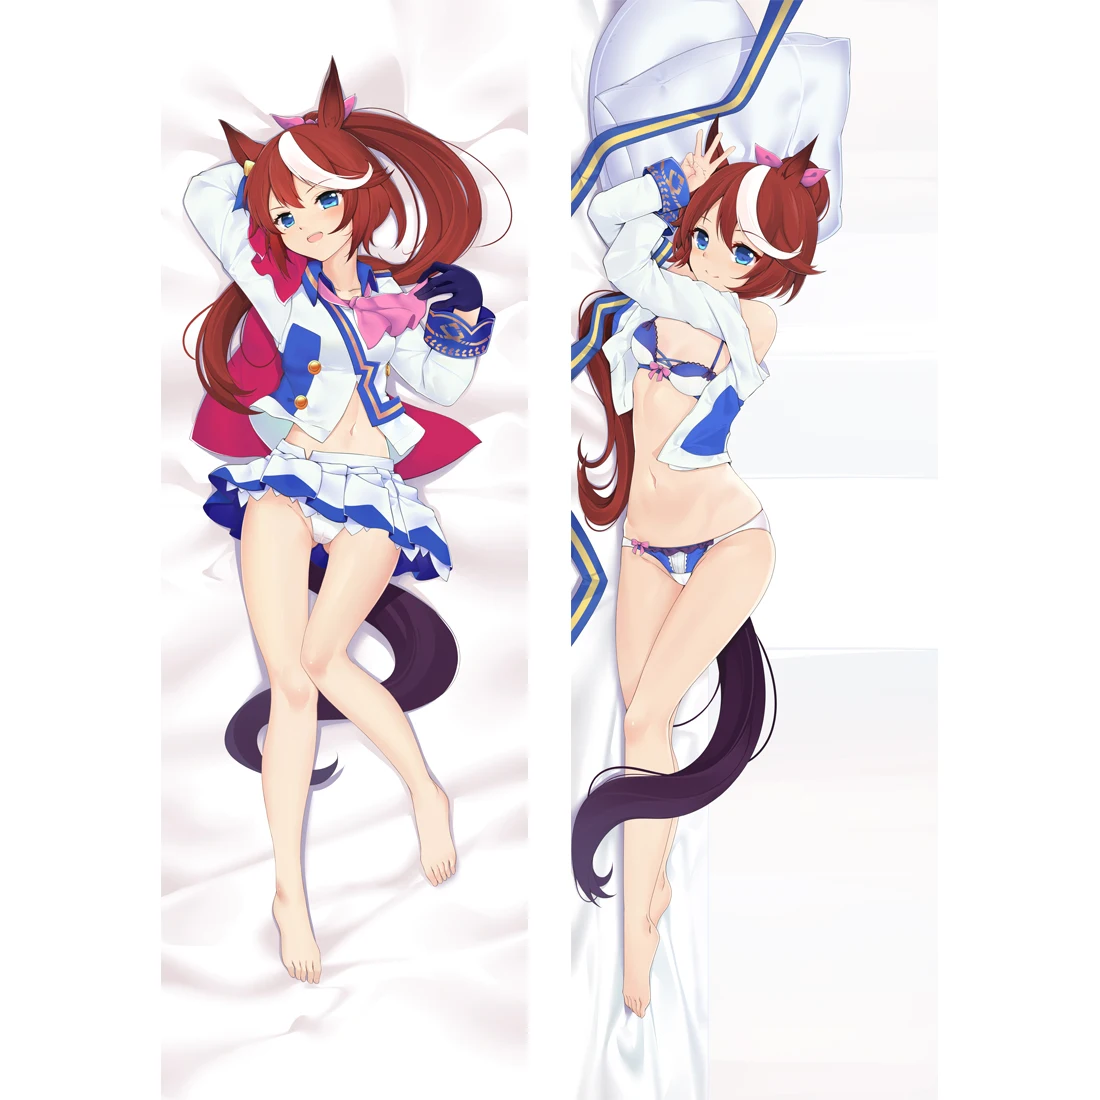 

Mxdfafa New Anime Dakimakura Case Pretty Derby Pillow Cover Pillow Covers 3D Double-sided Hugging Body Pillowcase